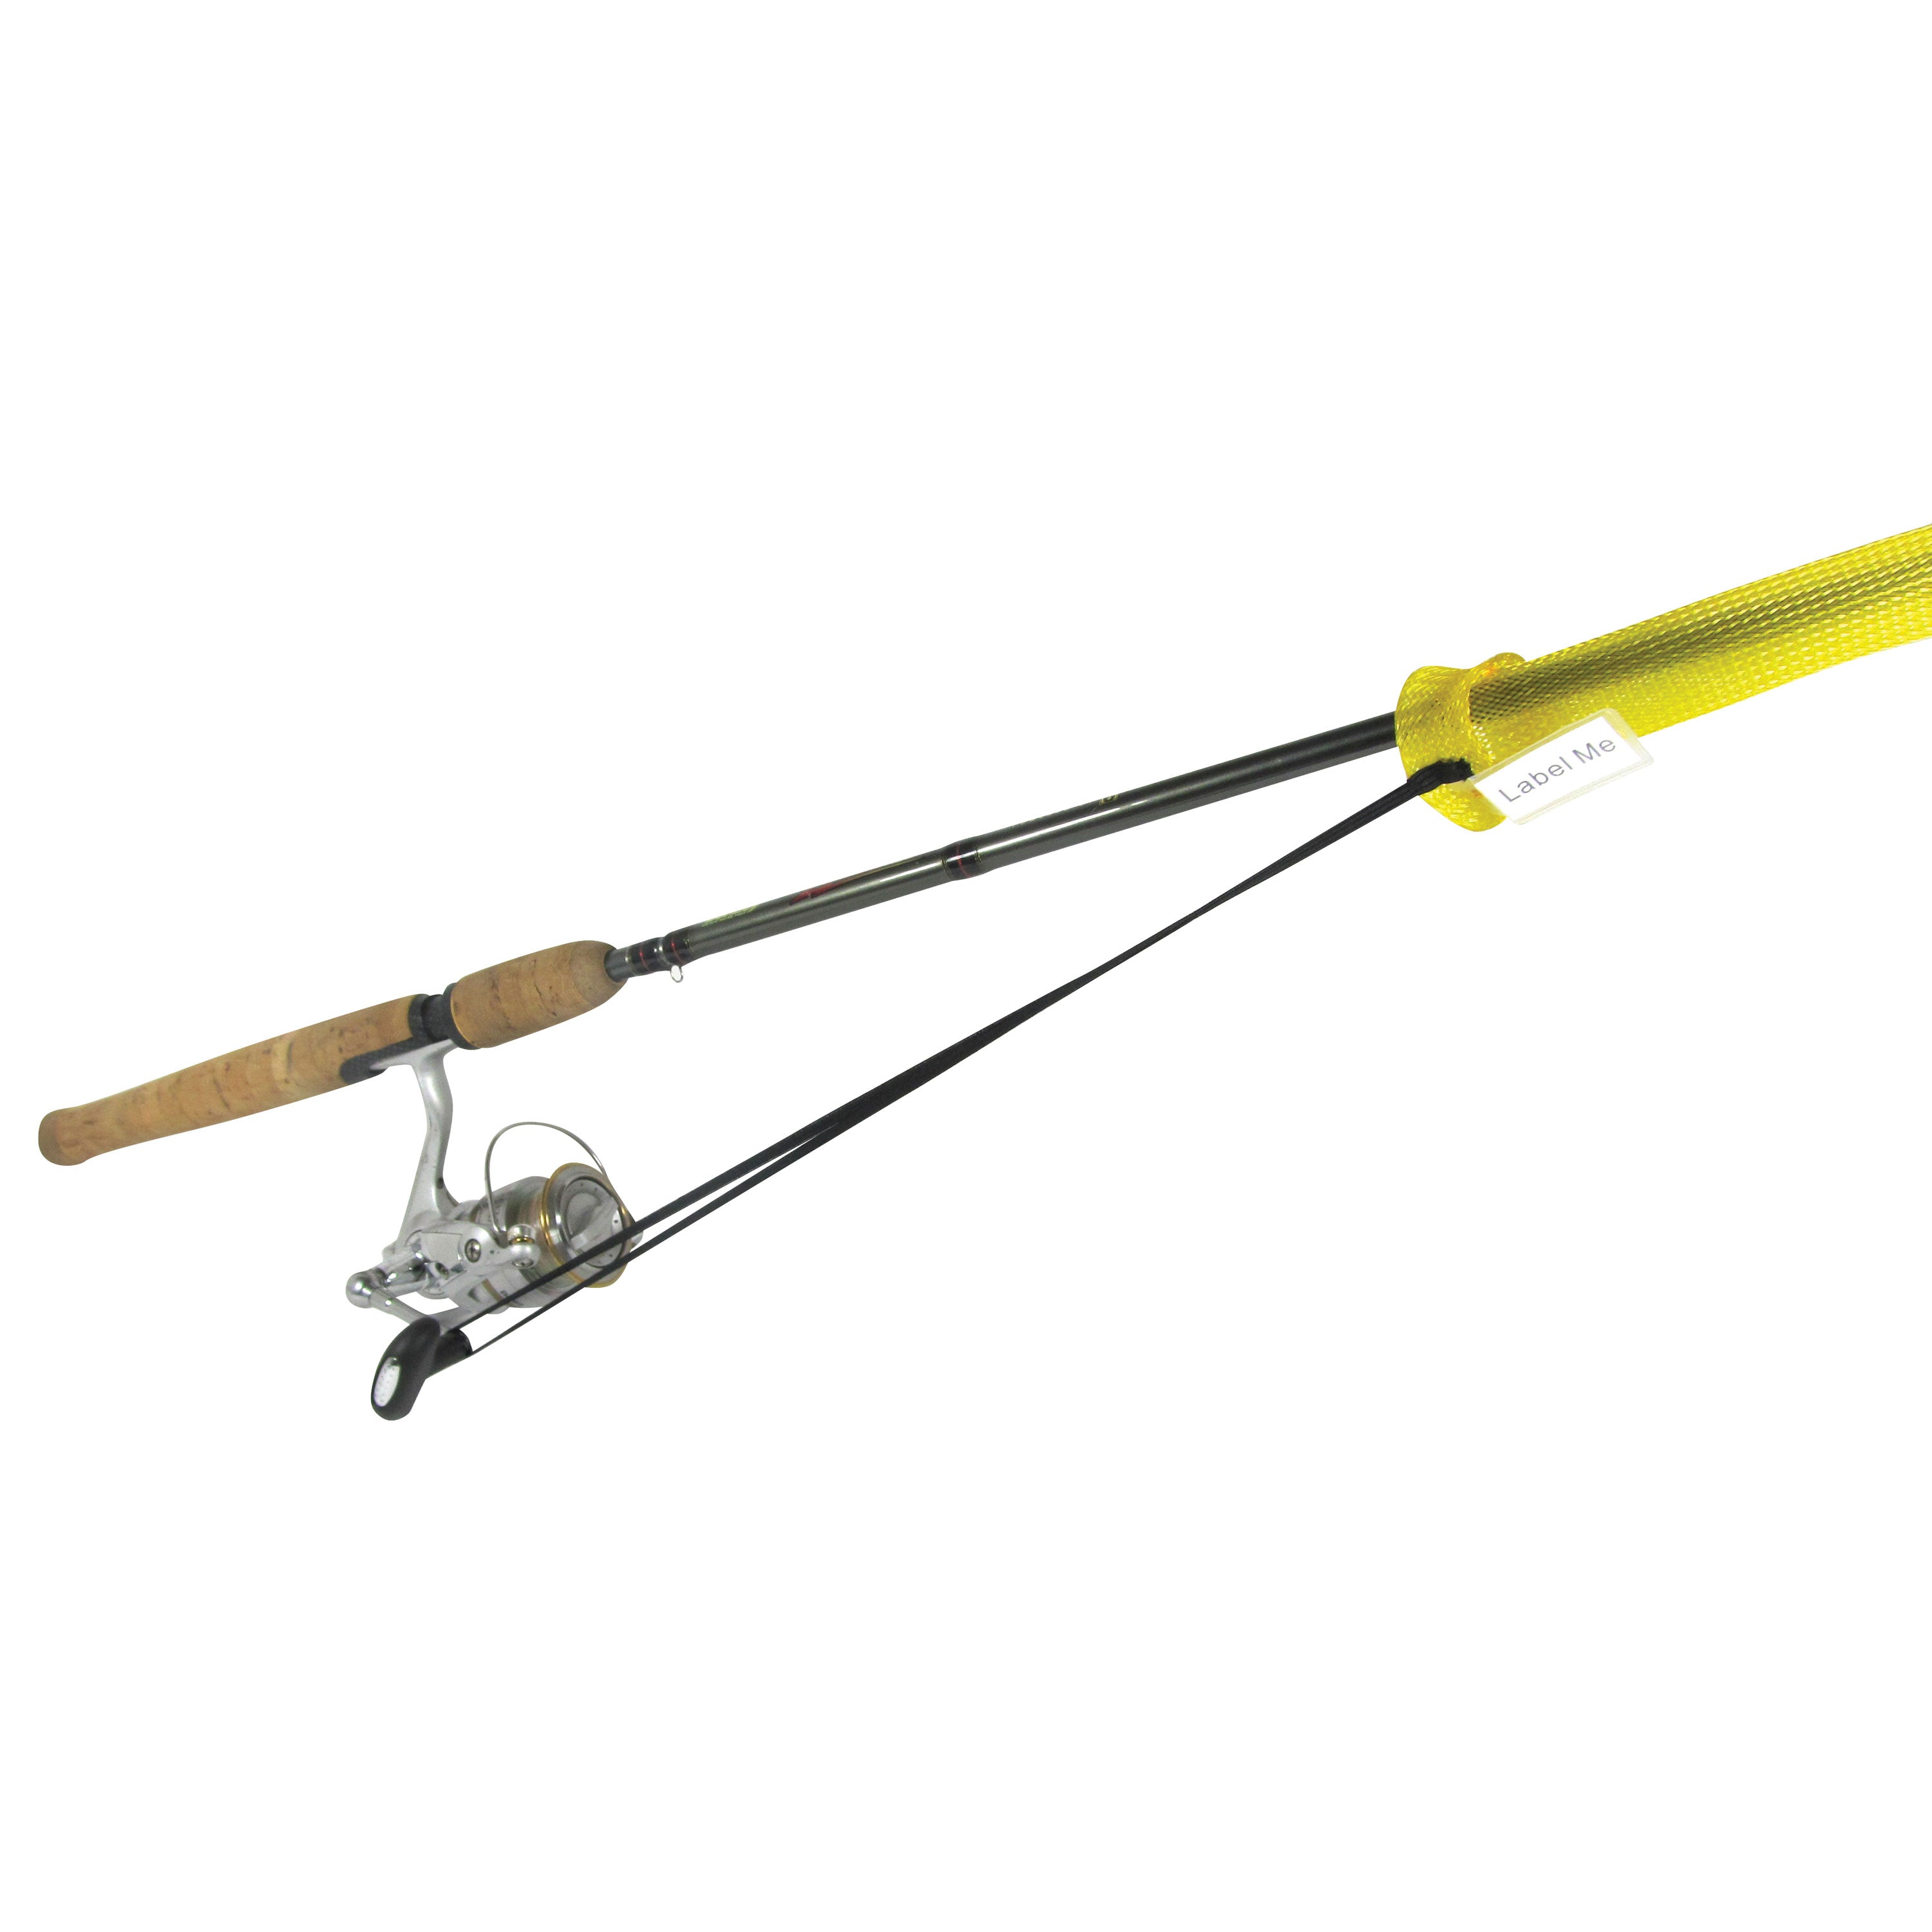 Outkast RS114-5-Y-BG SLIX Rod Cover - Spinning, 5 ft. Yellow (Small/Medium)